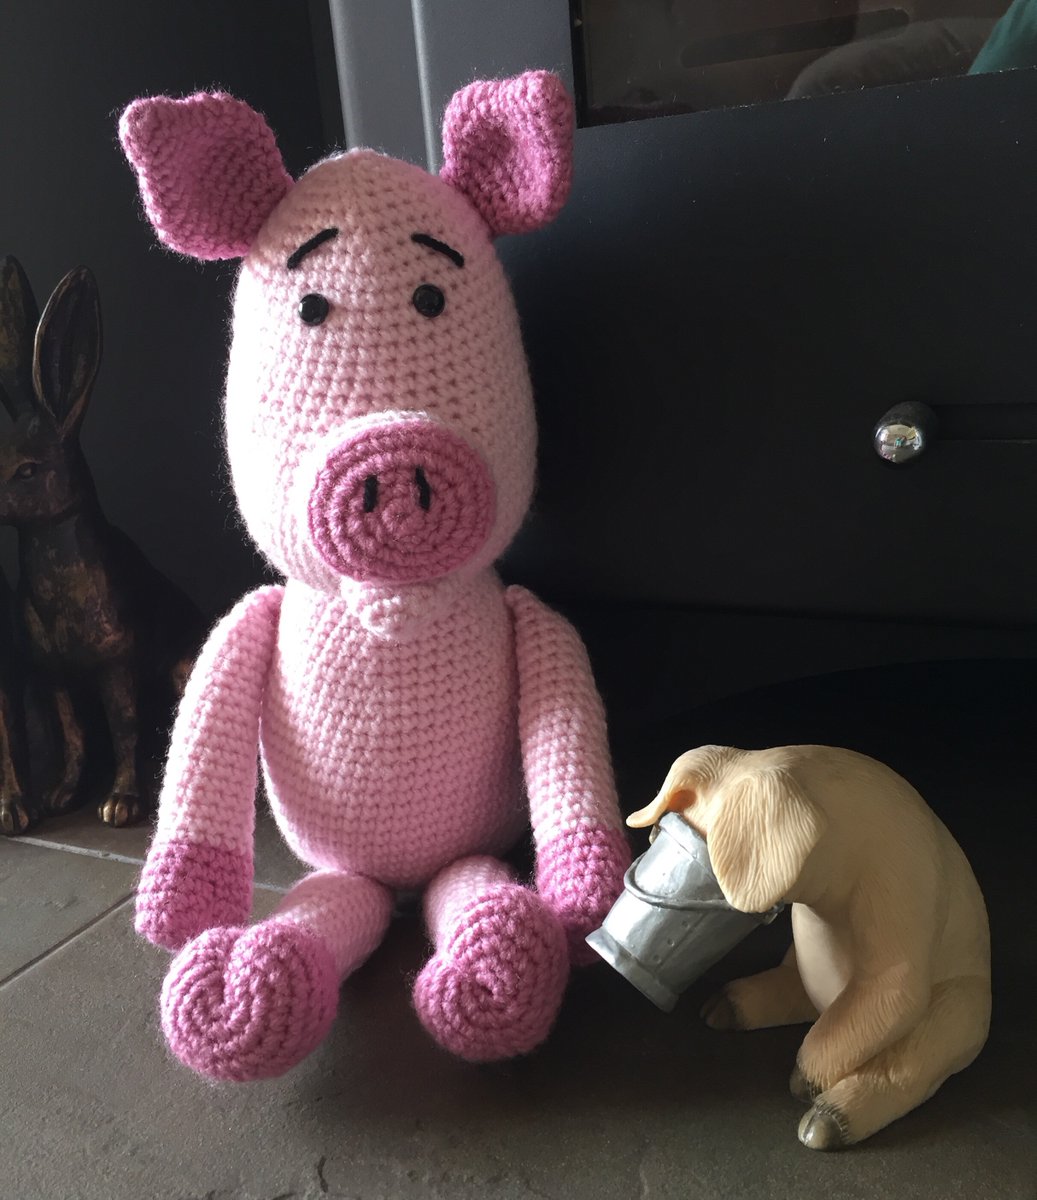 This little piggy is going to market & wants a home! Save his bacon! crwd.fr/2Jd9qny #ATSocialMedia #UKHashtags #firsttmaster #TweetUK #MHHSBD